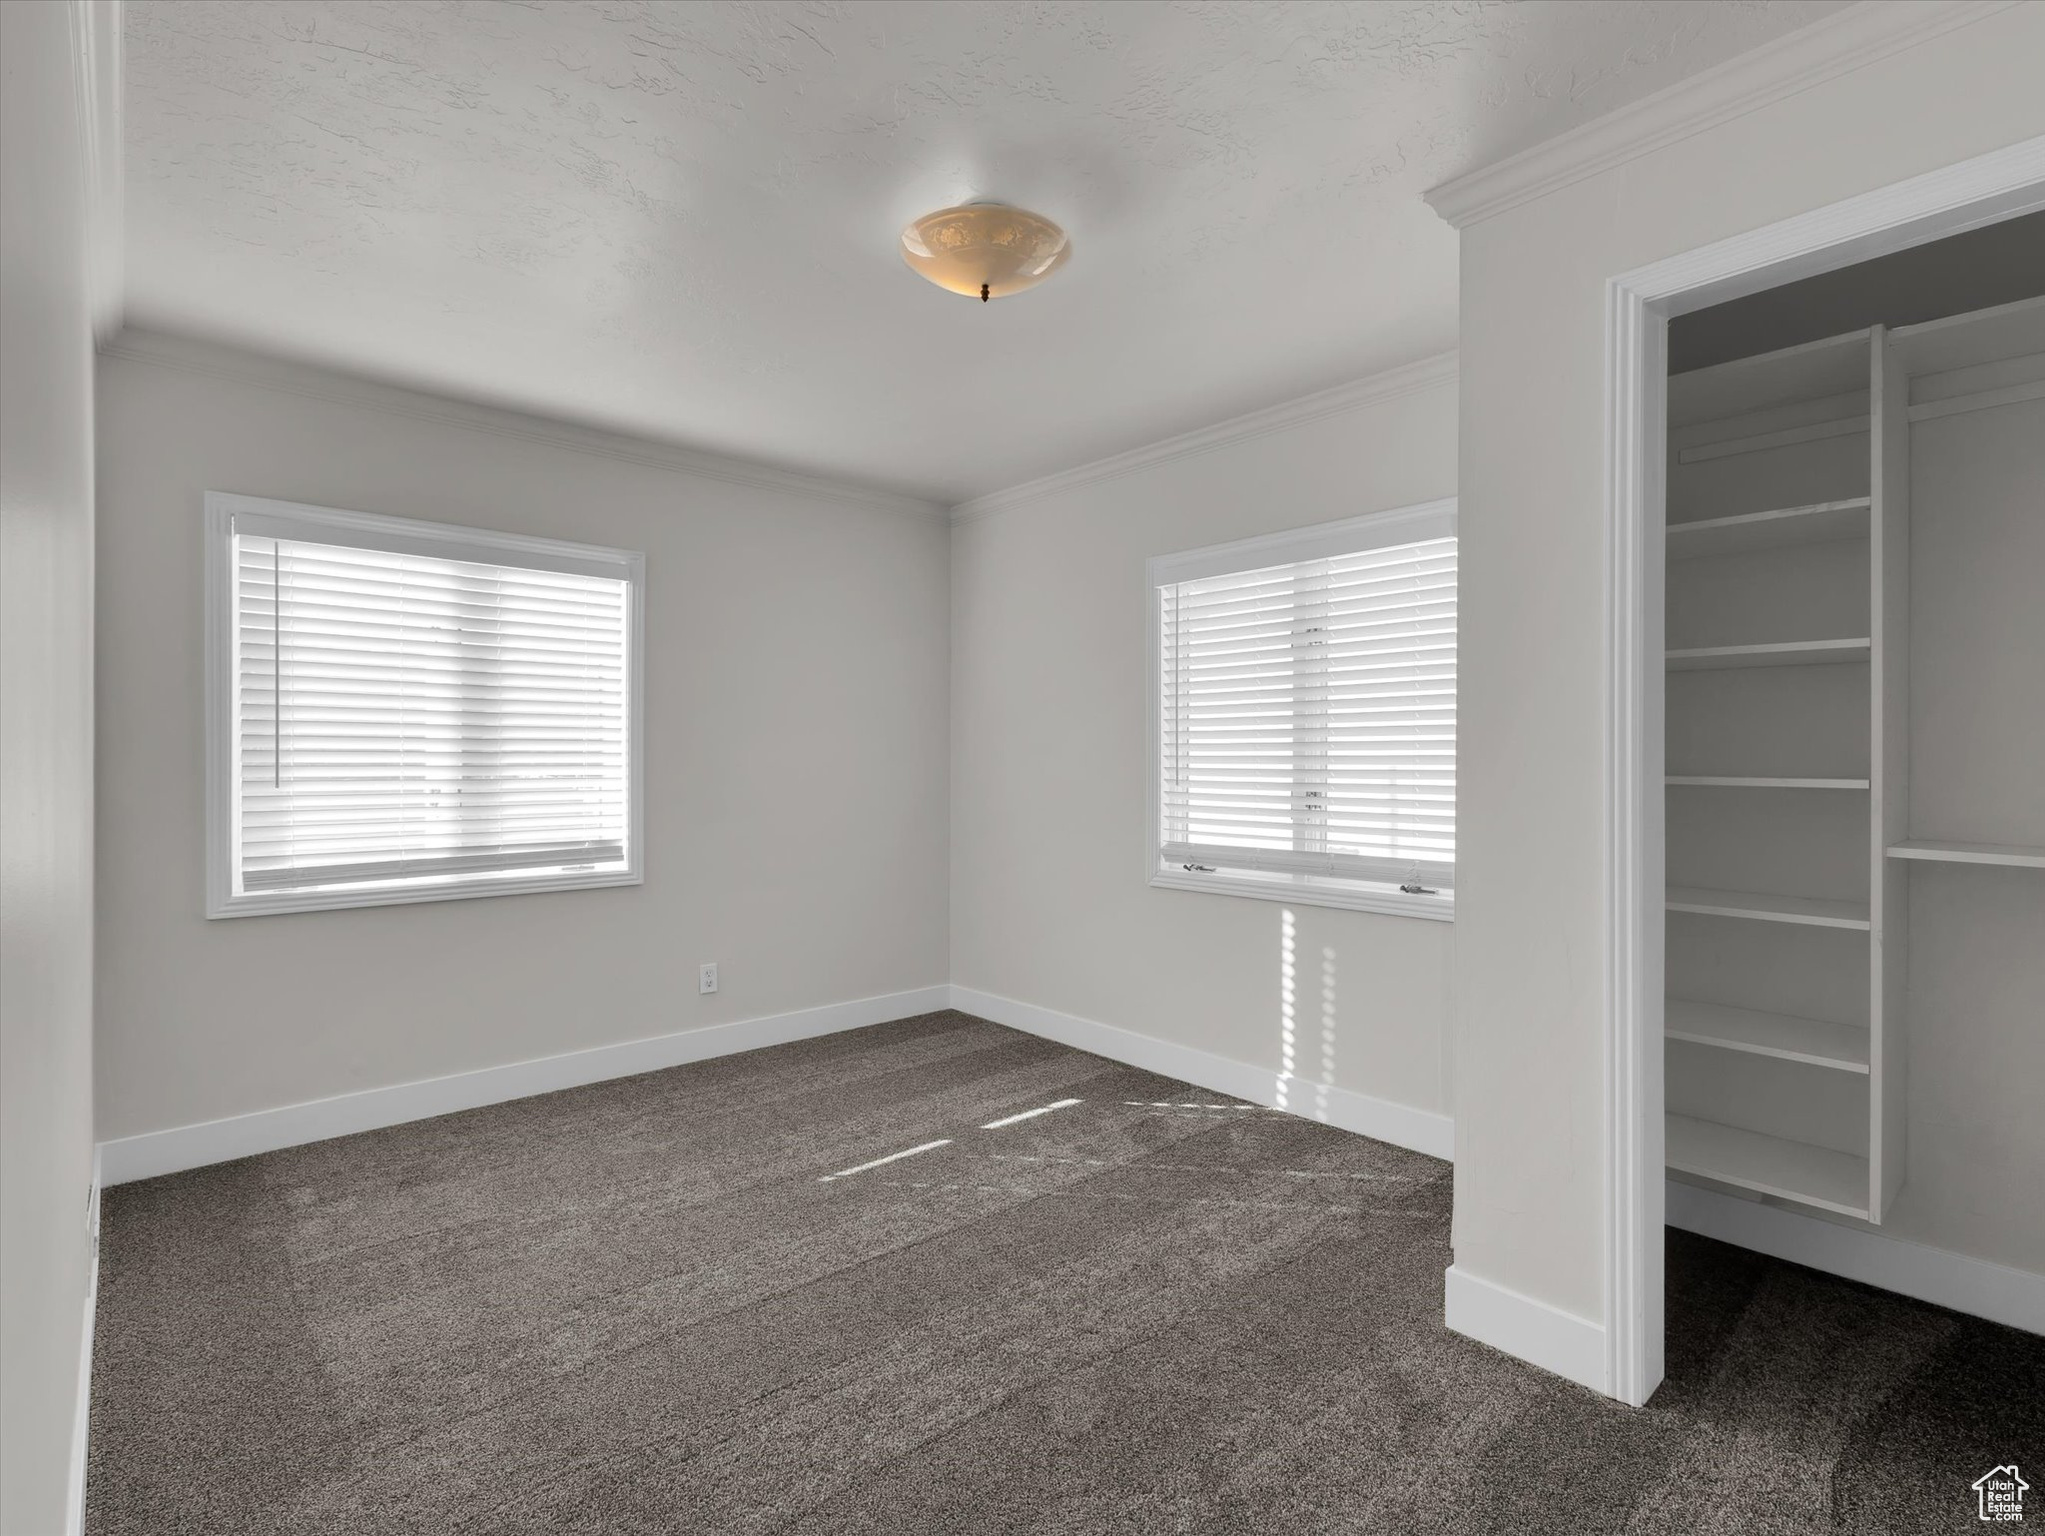 Unfurnished bedroom with ornamental molding and dark carpet